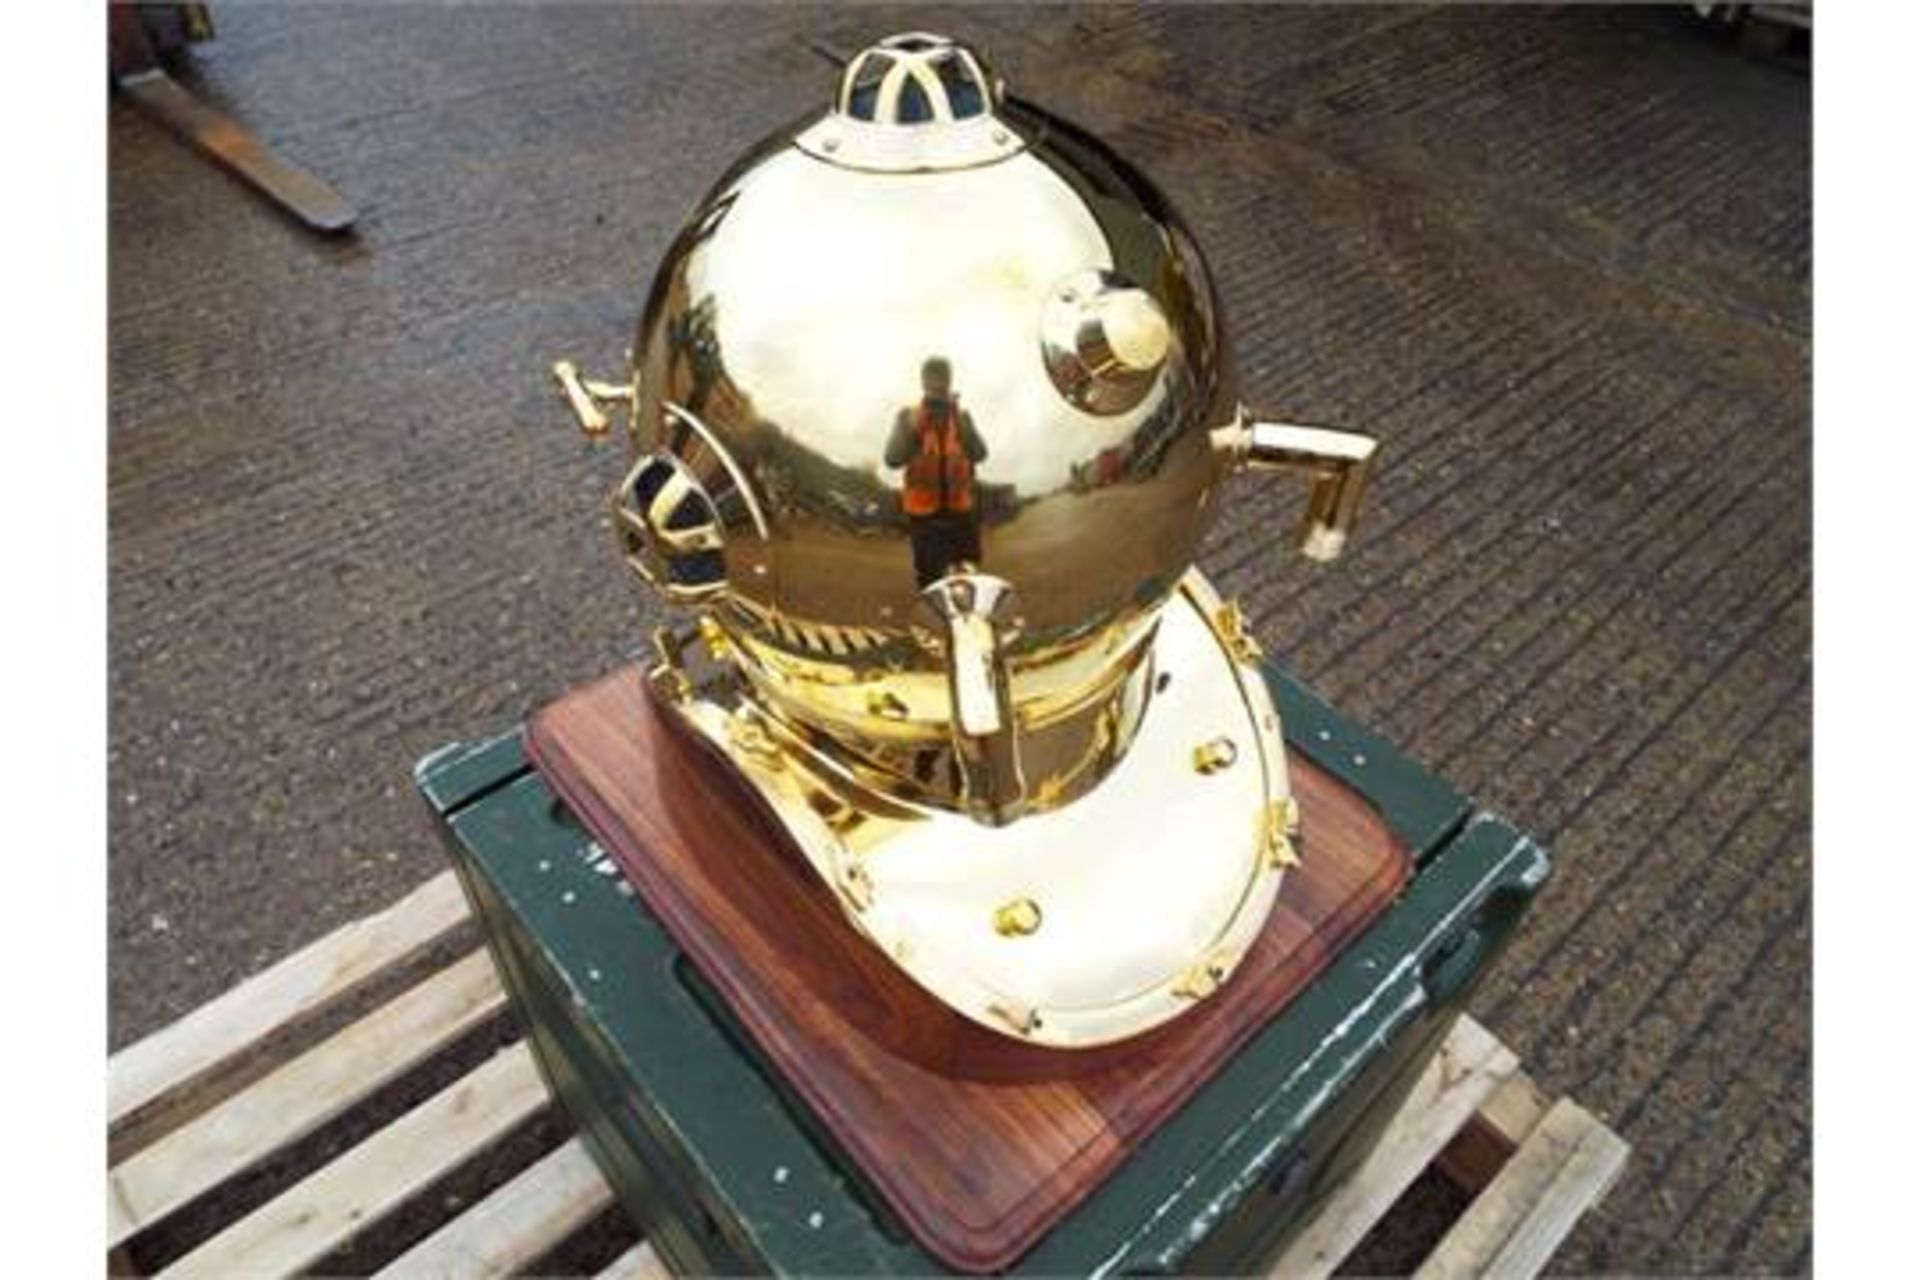 Replica Full Size U.S. Navy Mark V Brass Diving Helmet on Wooden Display Stand - Image 3 of 5